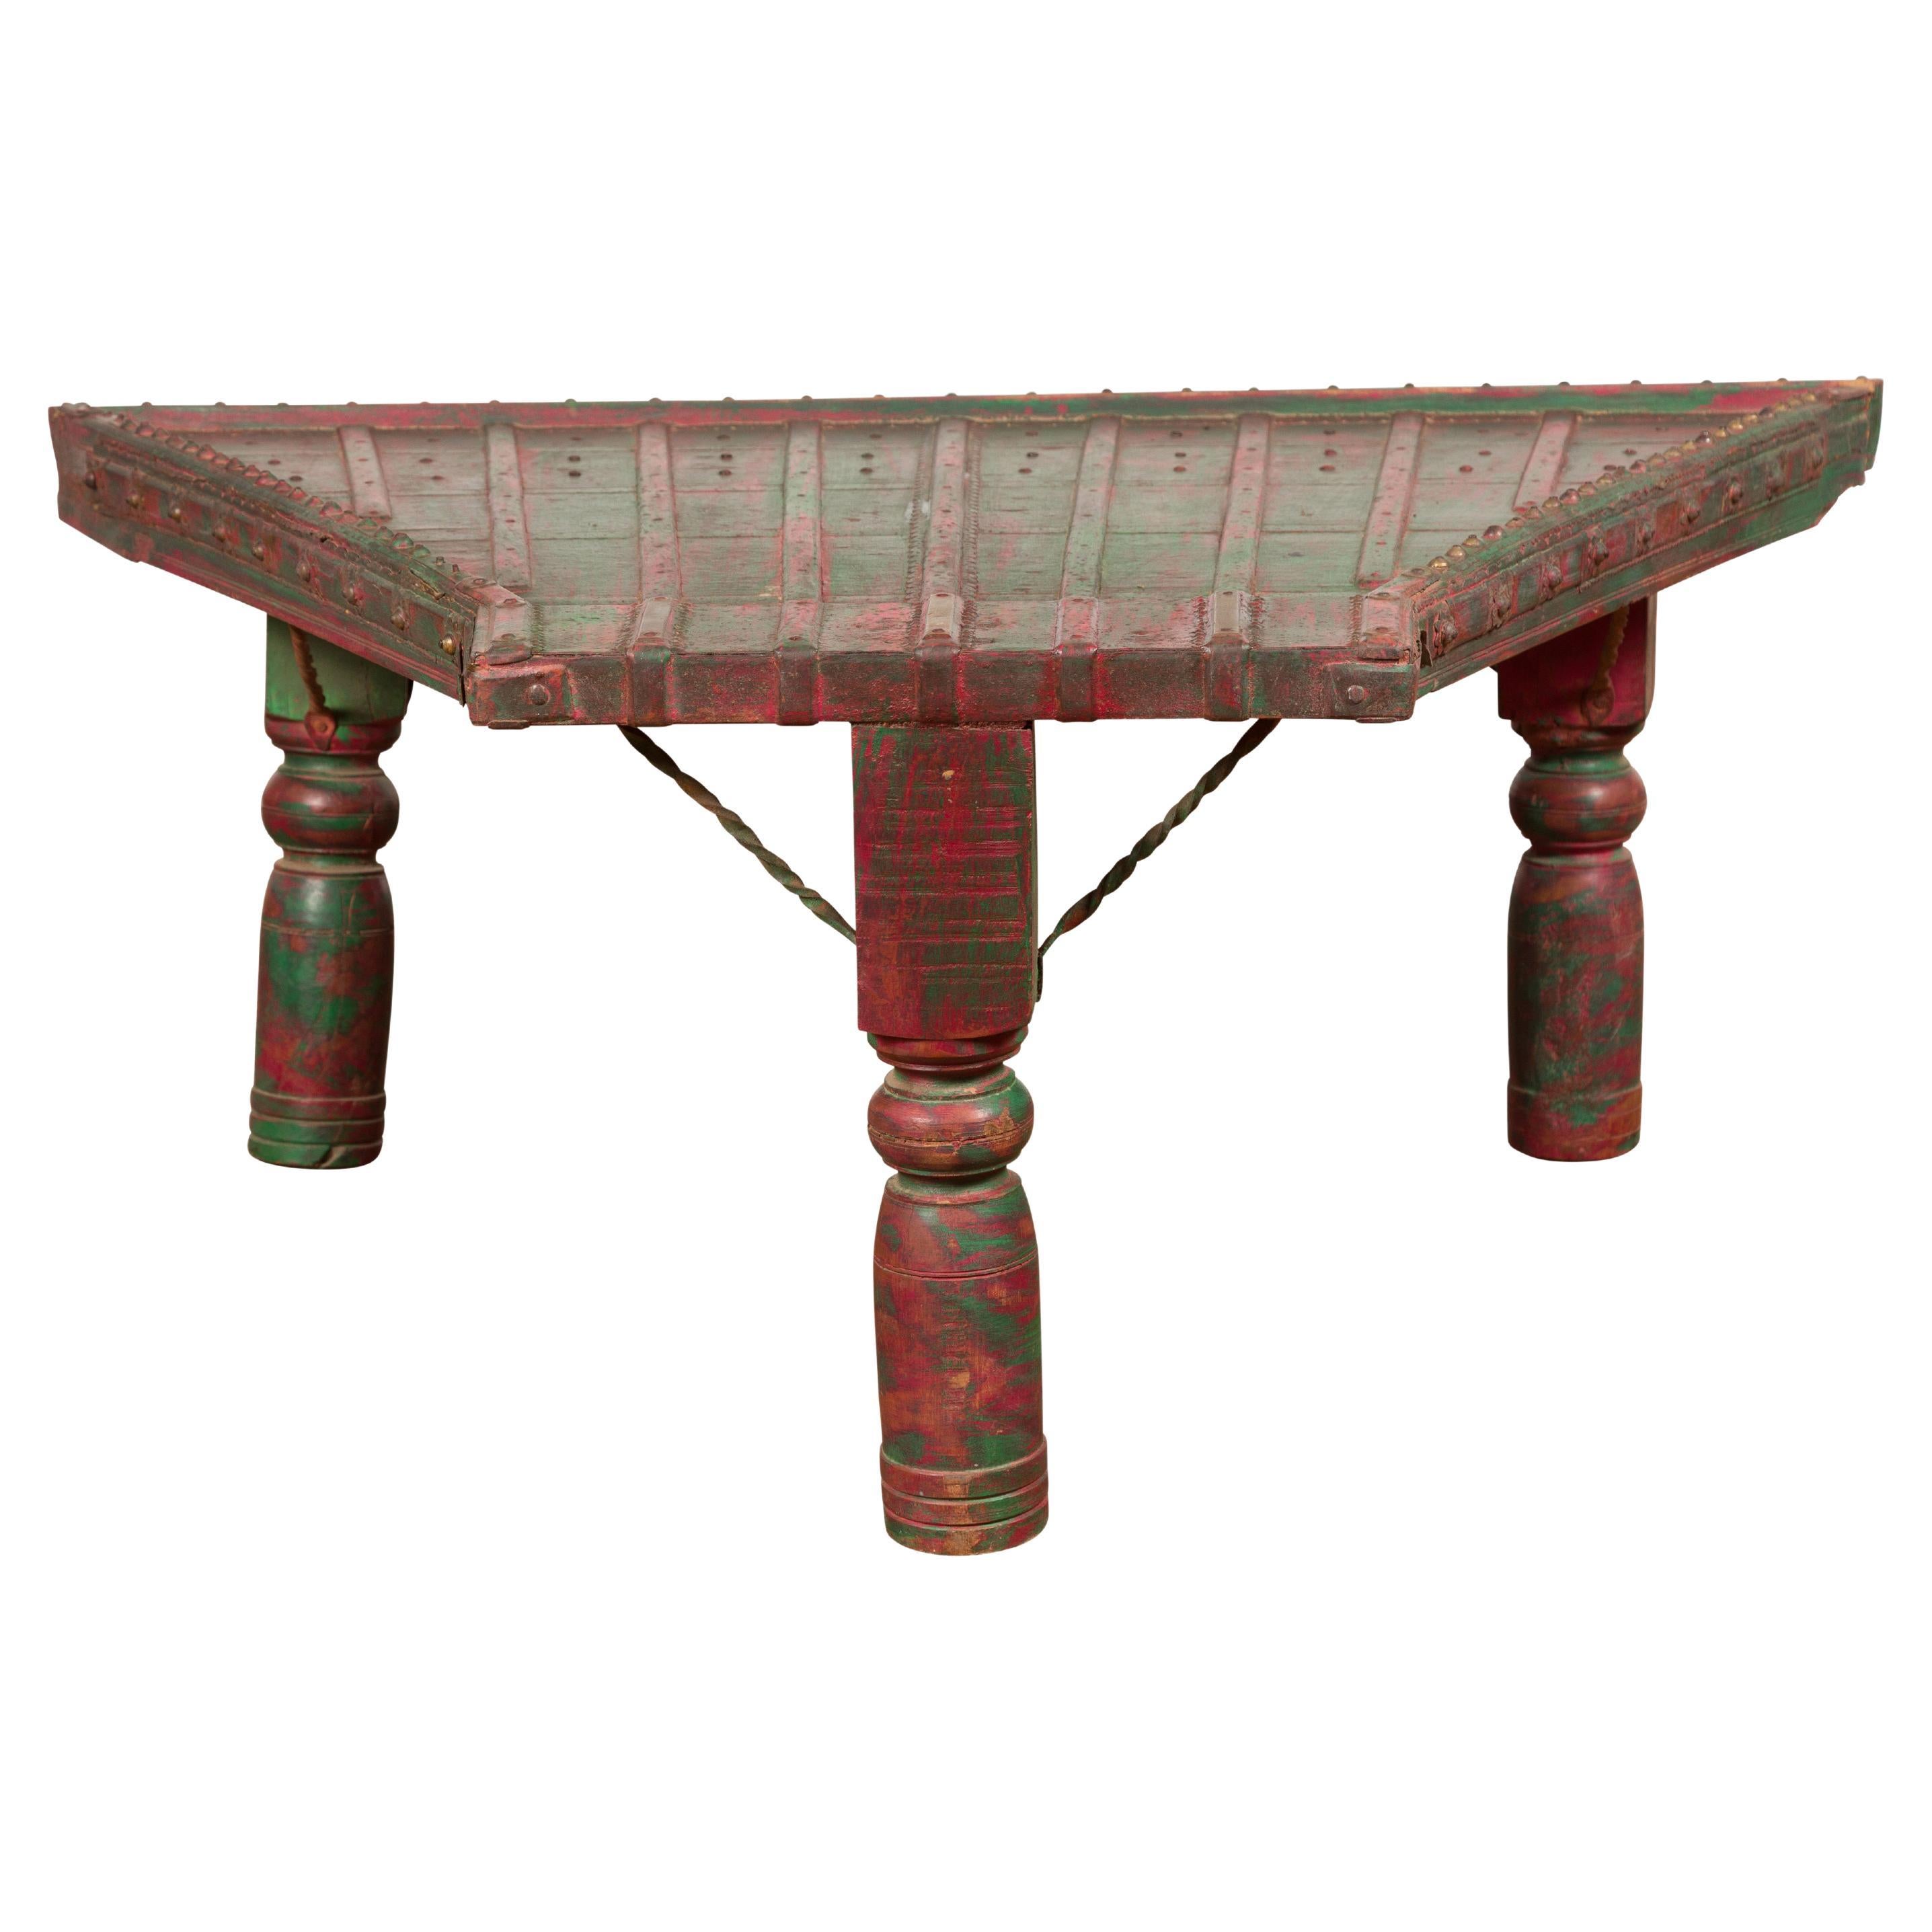 Triangular Green & Red Cart Converted into Coffee Table